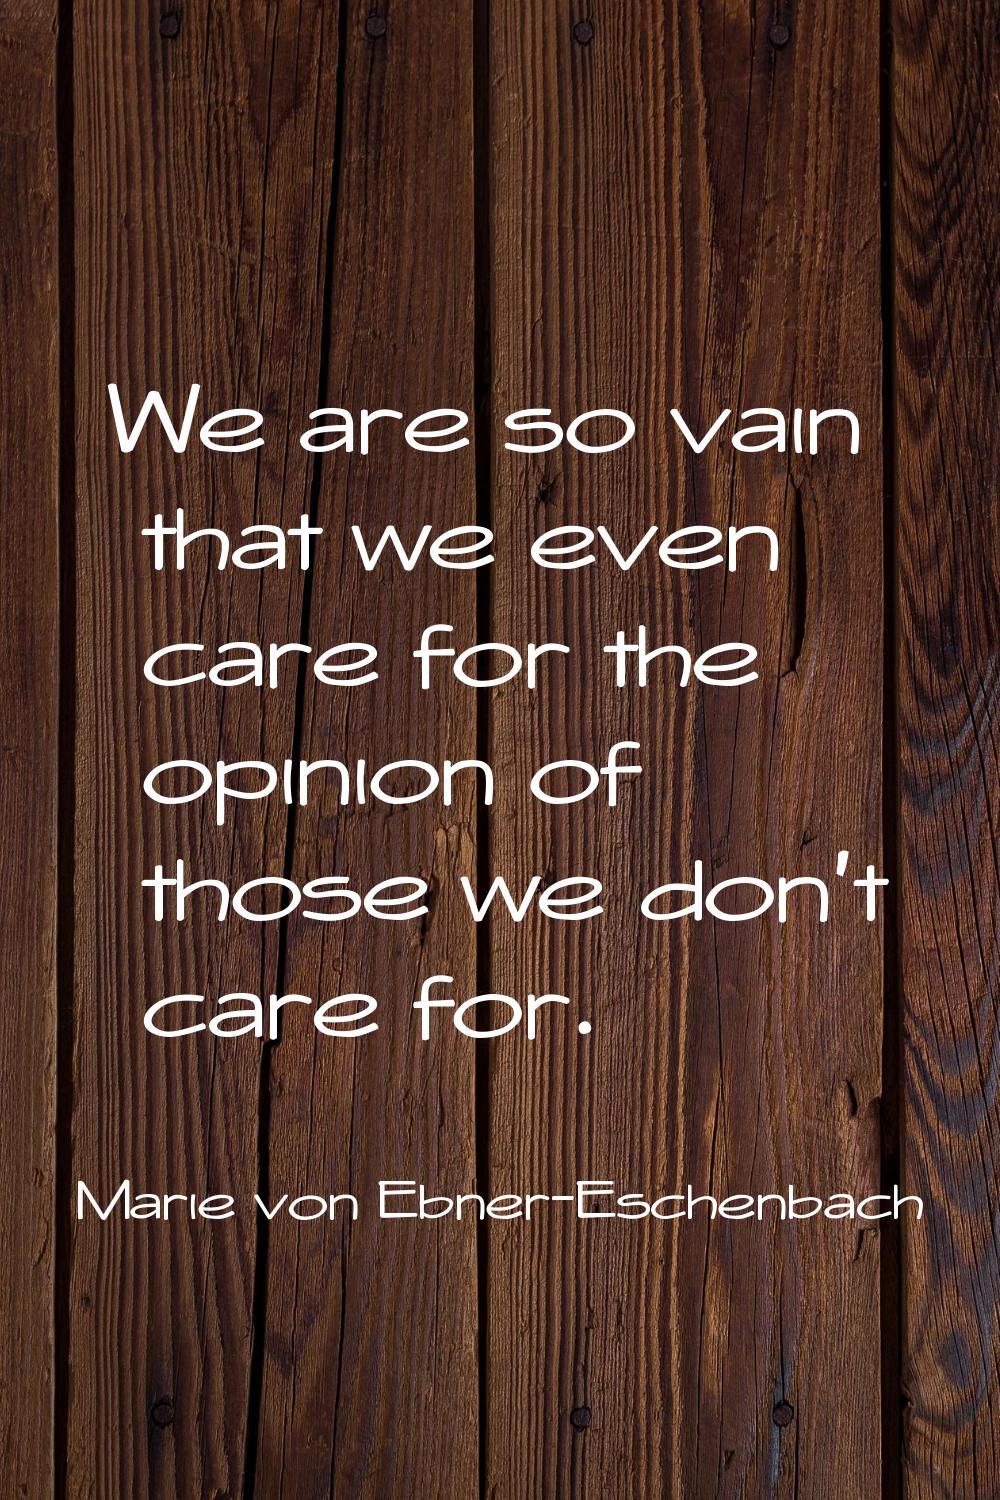 We are so vain that we even care for the opinion of those we don't care for.